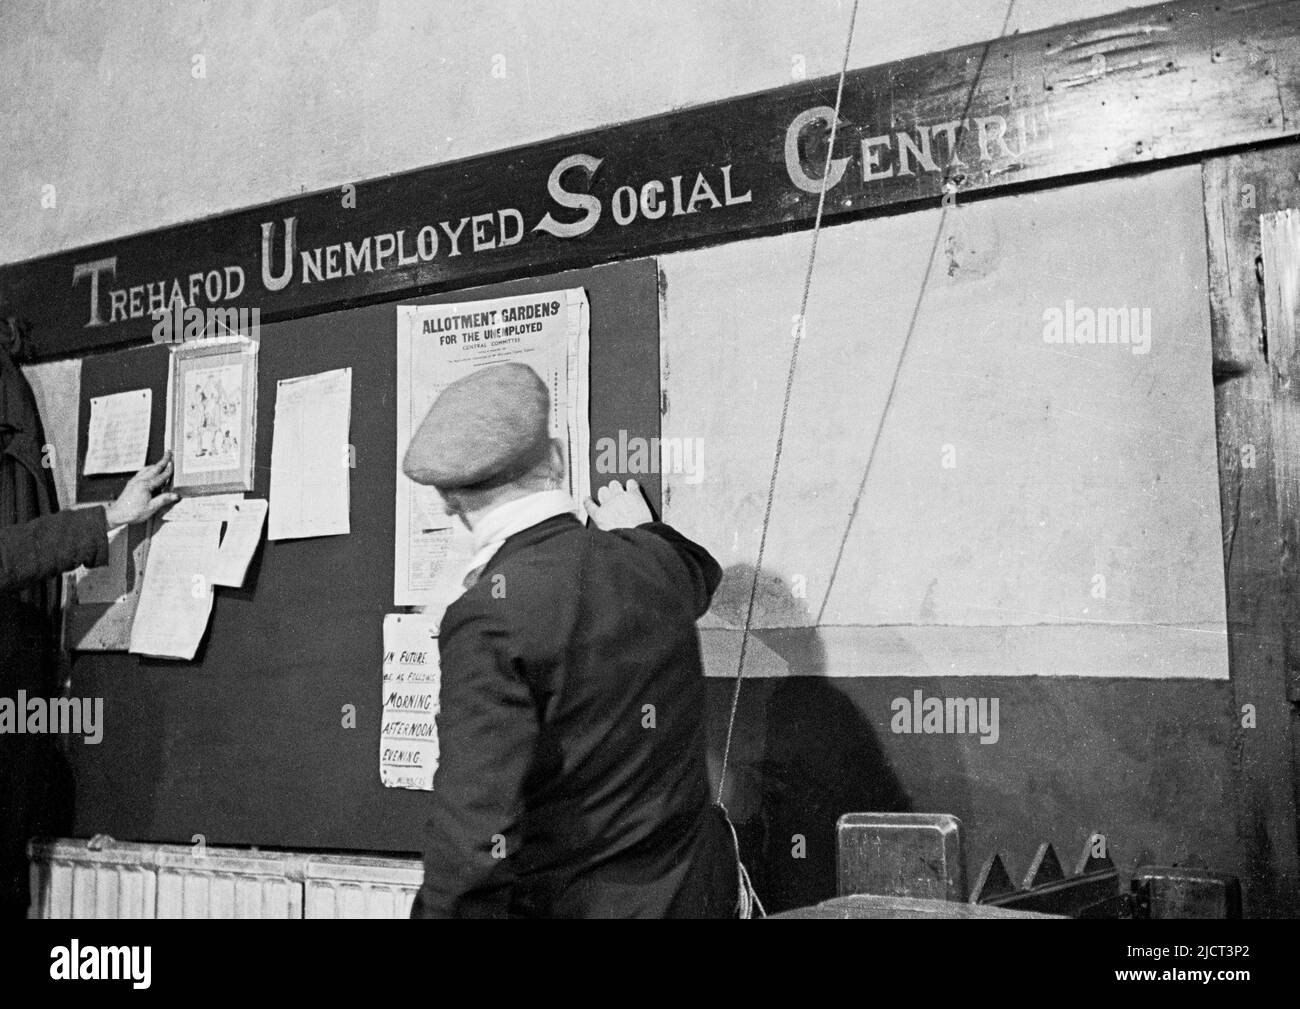 1940s, historical, a male in cloth cap looking at the notice board at the 'Trehafod Unemployed Social Centre. Trehafod, like many villages in South Wales, was dependent on coal mining, with a lack of alternative work opportunities. There was high unemployment in this era and so a centre was set up for unemployed mineworkers to meet for a chat and game of cribbage. One of the notices reads, 'allotment gardens for the unemployed'. Stock Photo